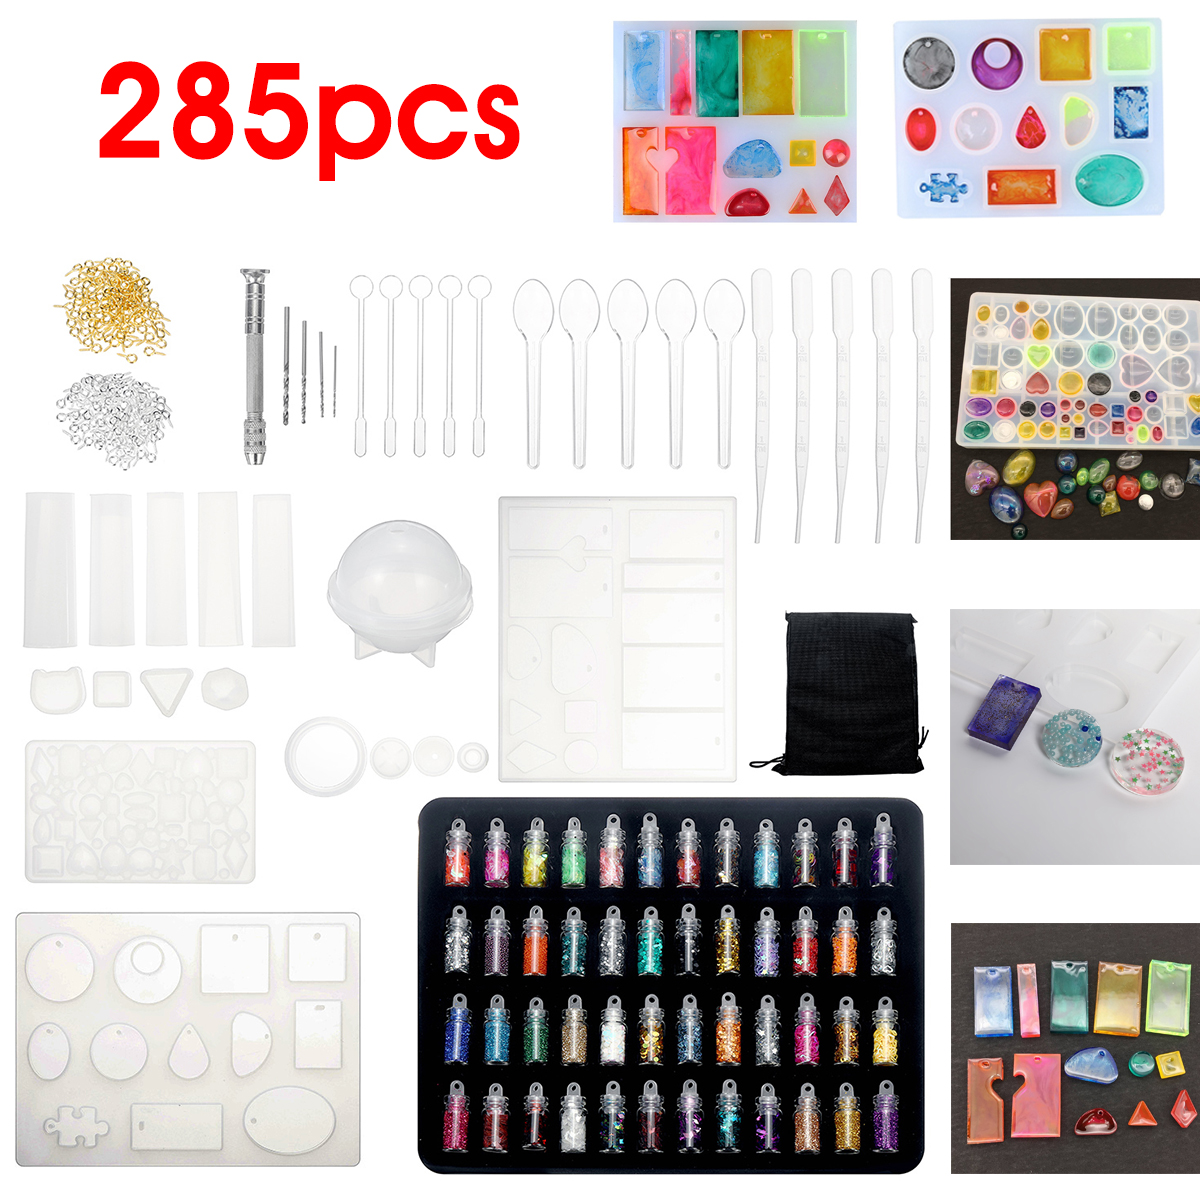 285Pcs-Resin-Casting-Molds-Kit-Silicone-Making-Jewelry-DIY-Pendant-Craft-Mould-Tools-Kit-1808480-1